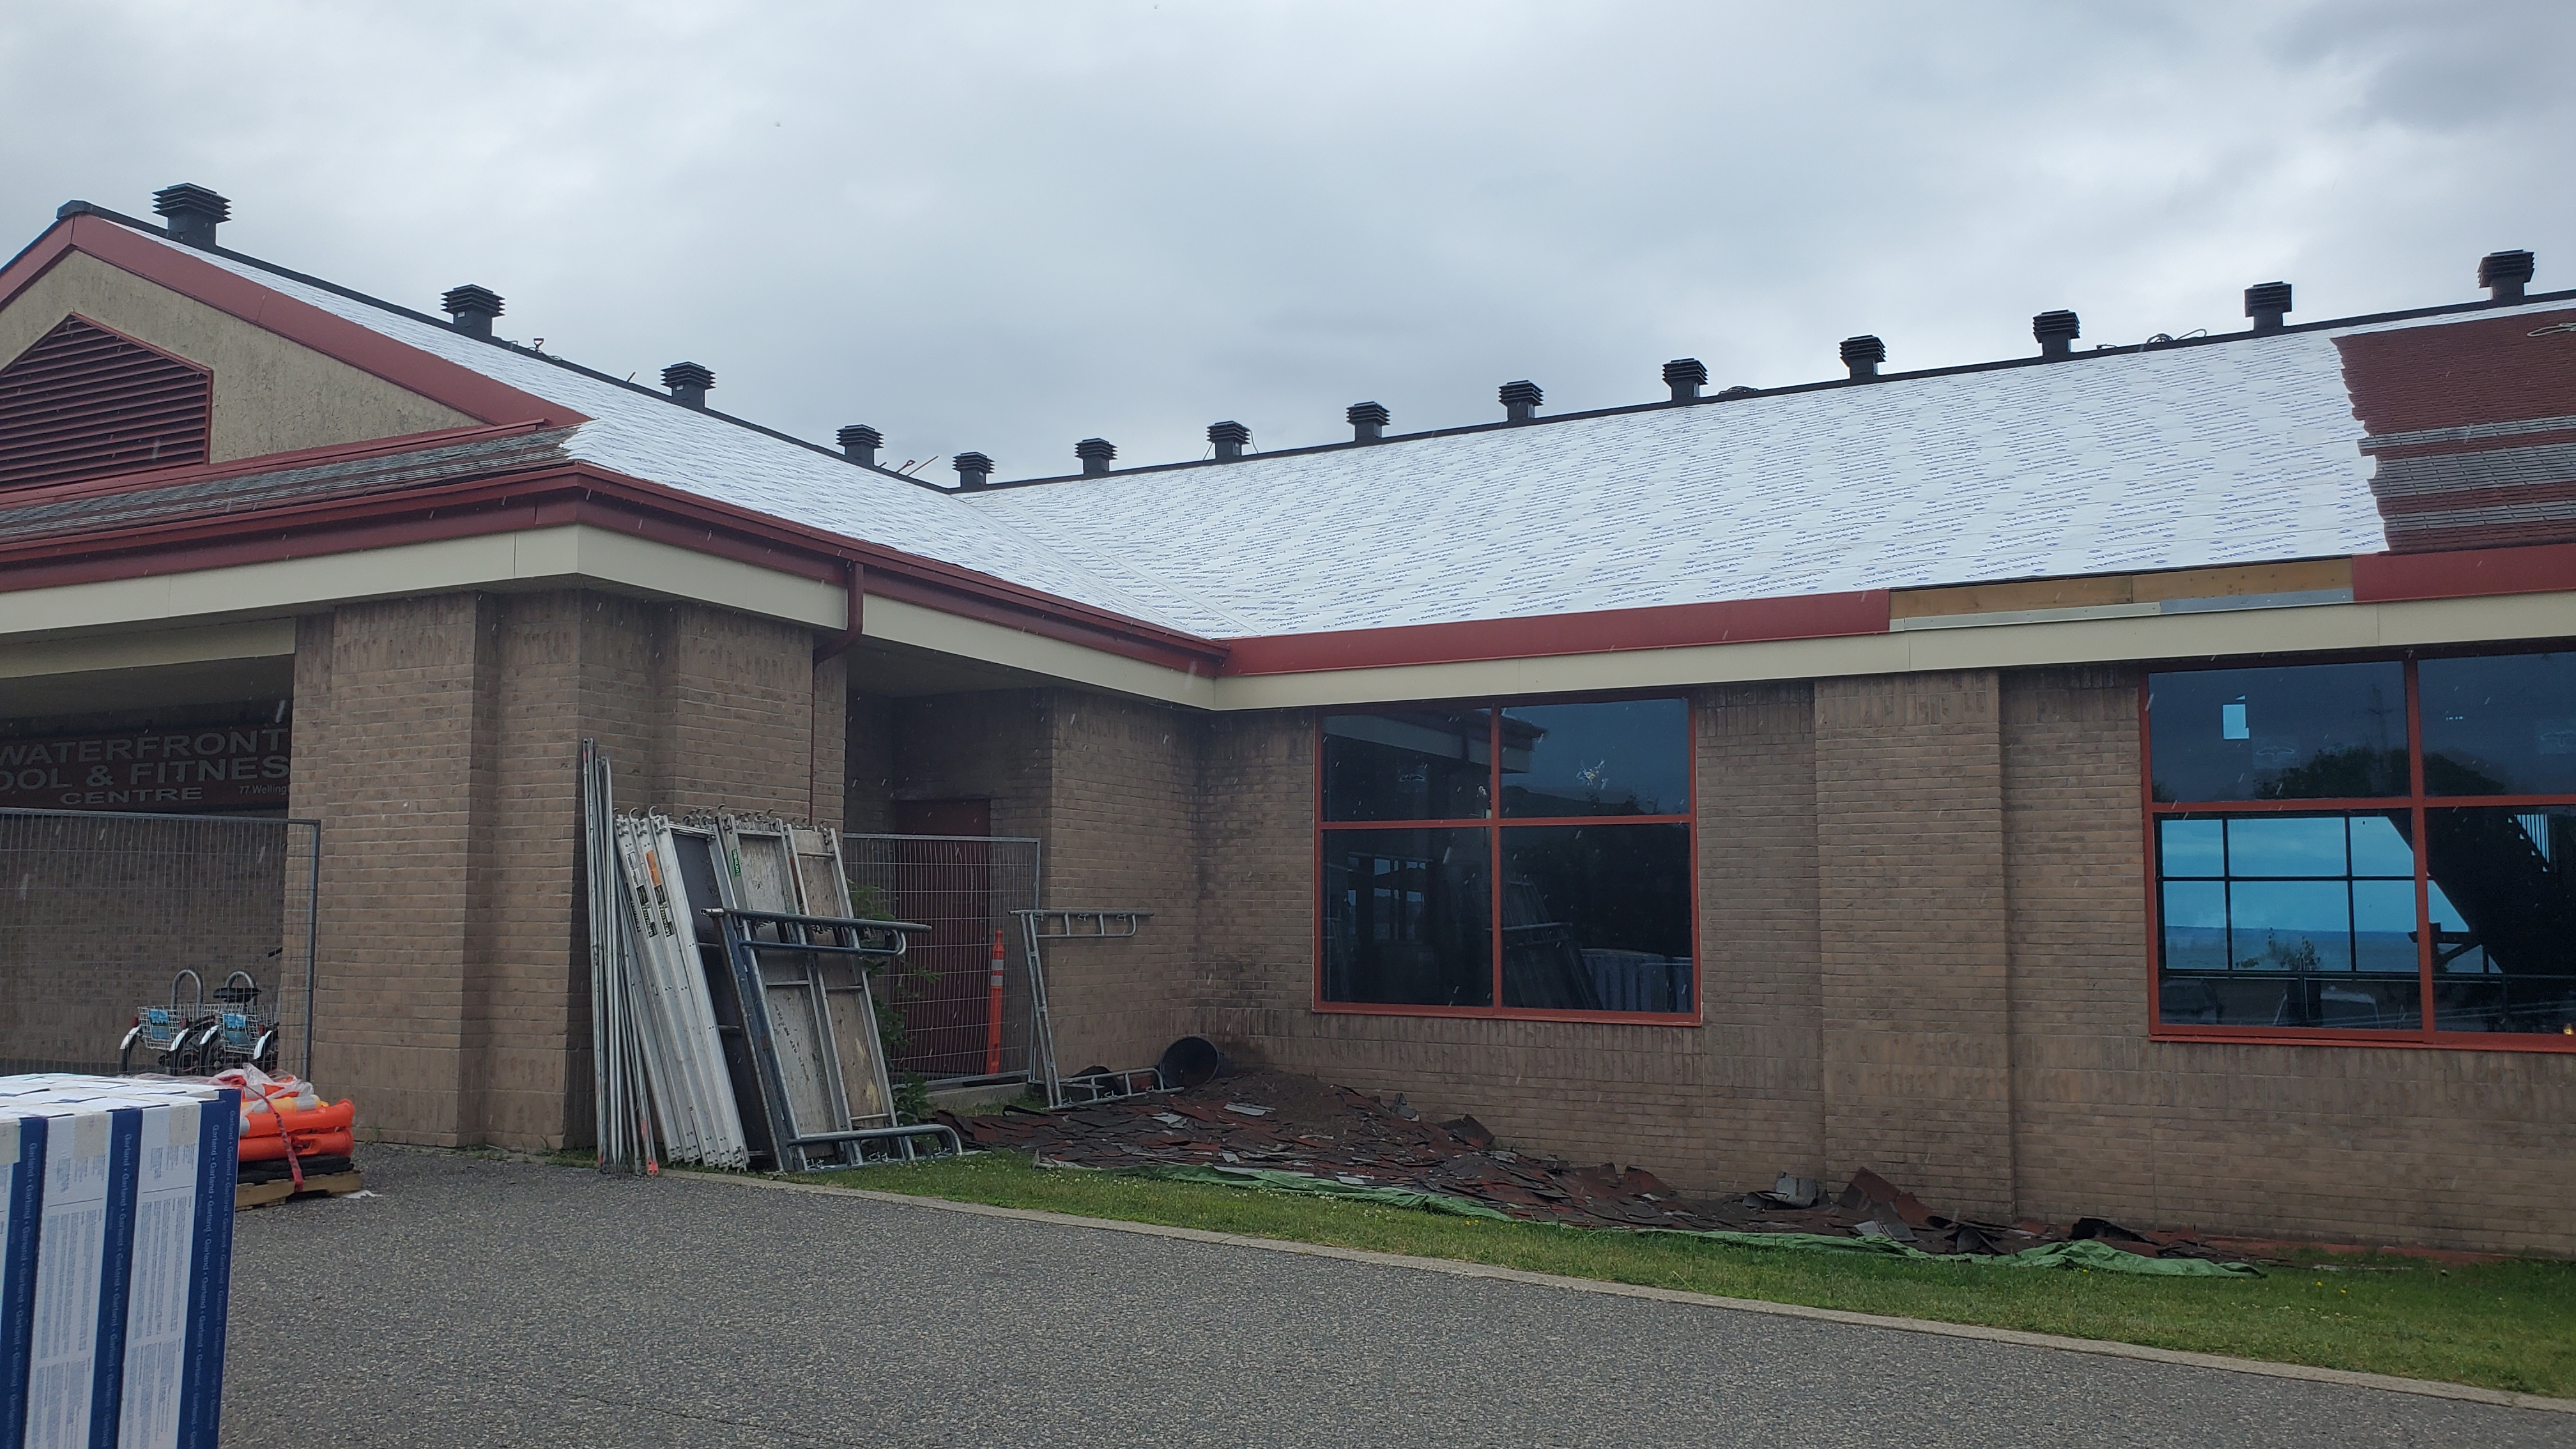 Exterior image of the PFC with part of the shingles removed and roof underlay visible.